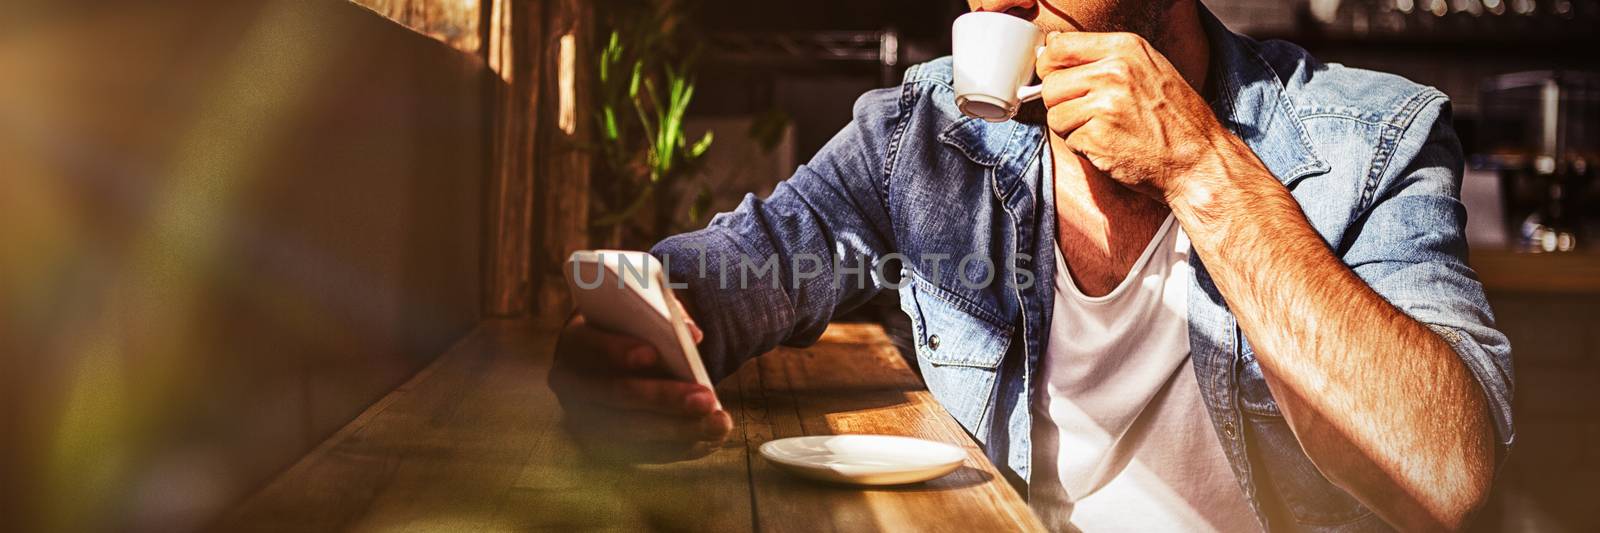 Man drinking a cup of coffee in the cafe